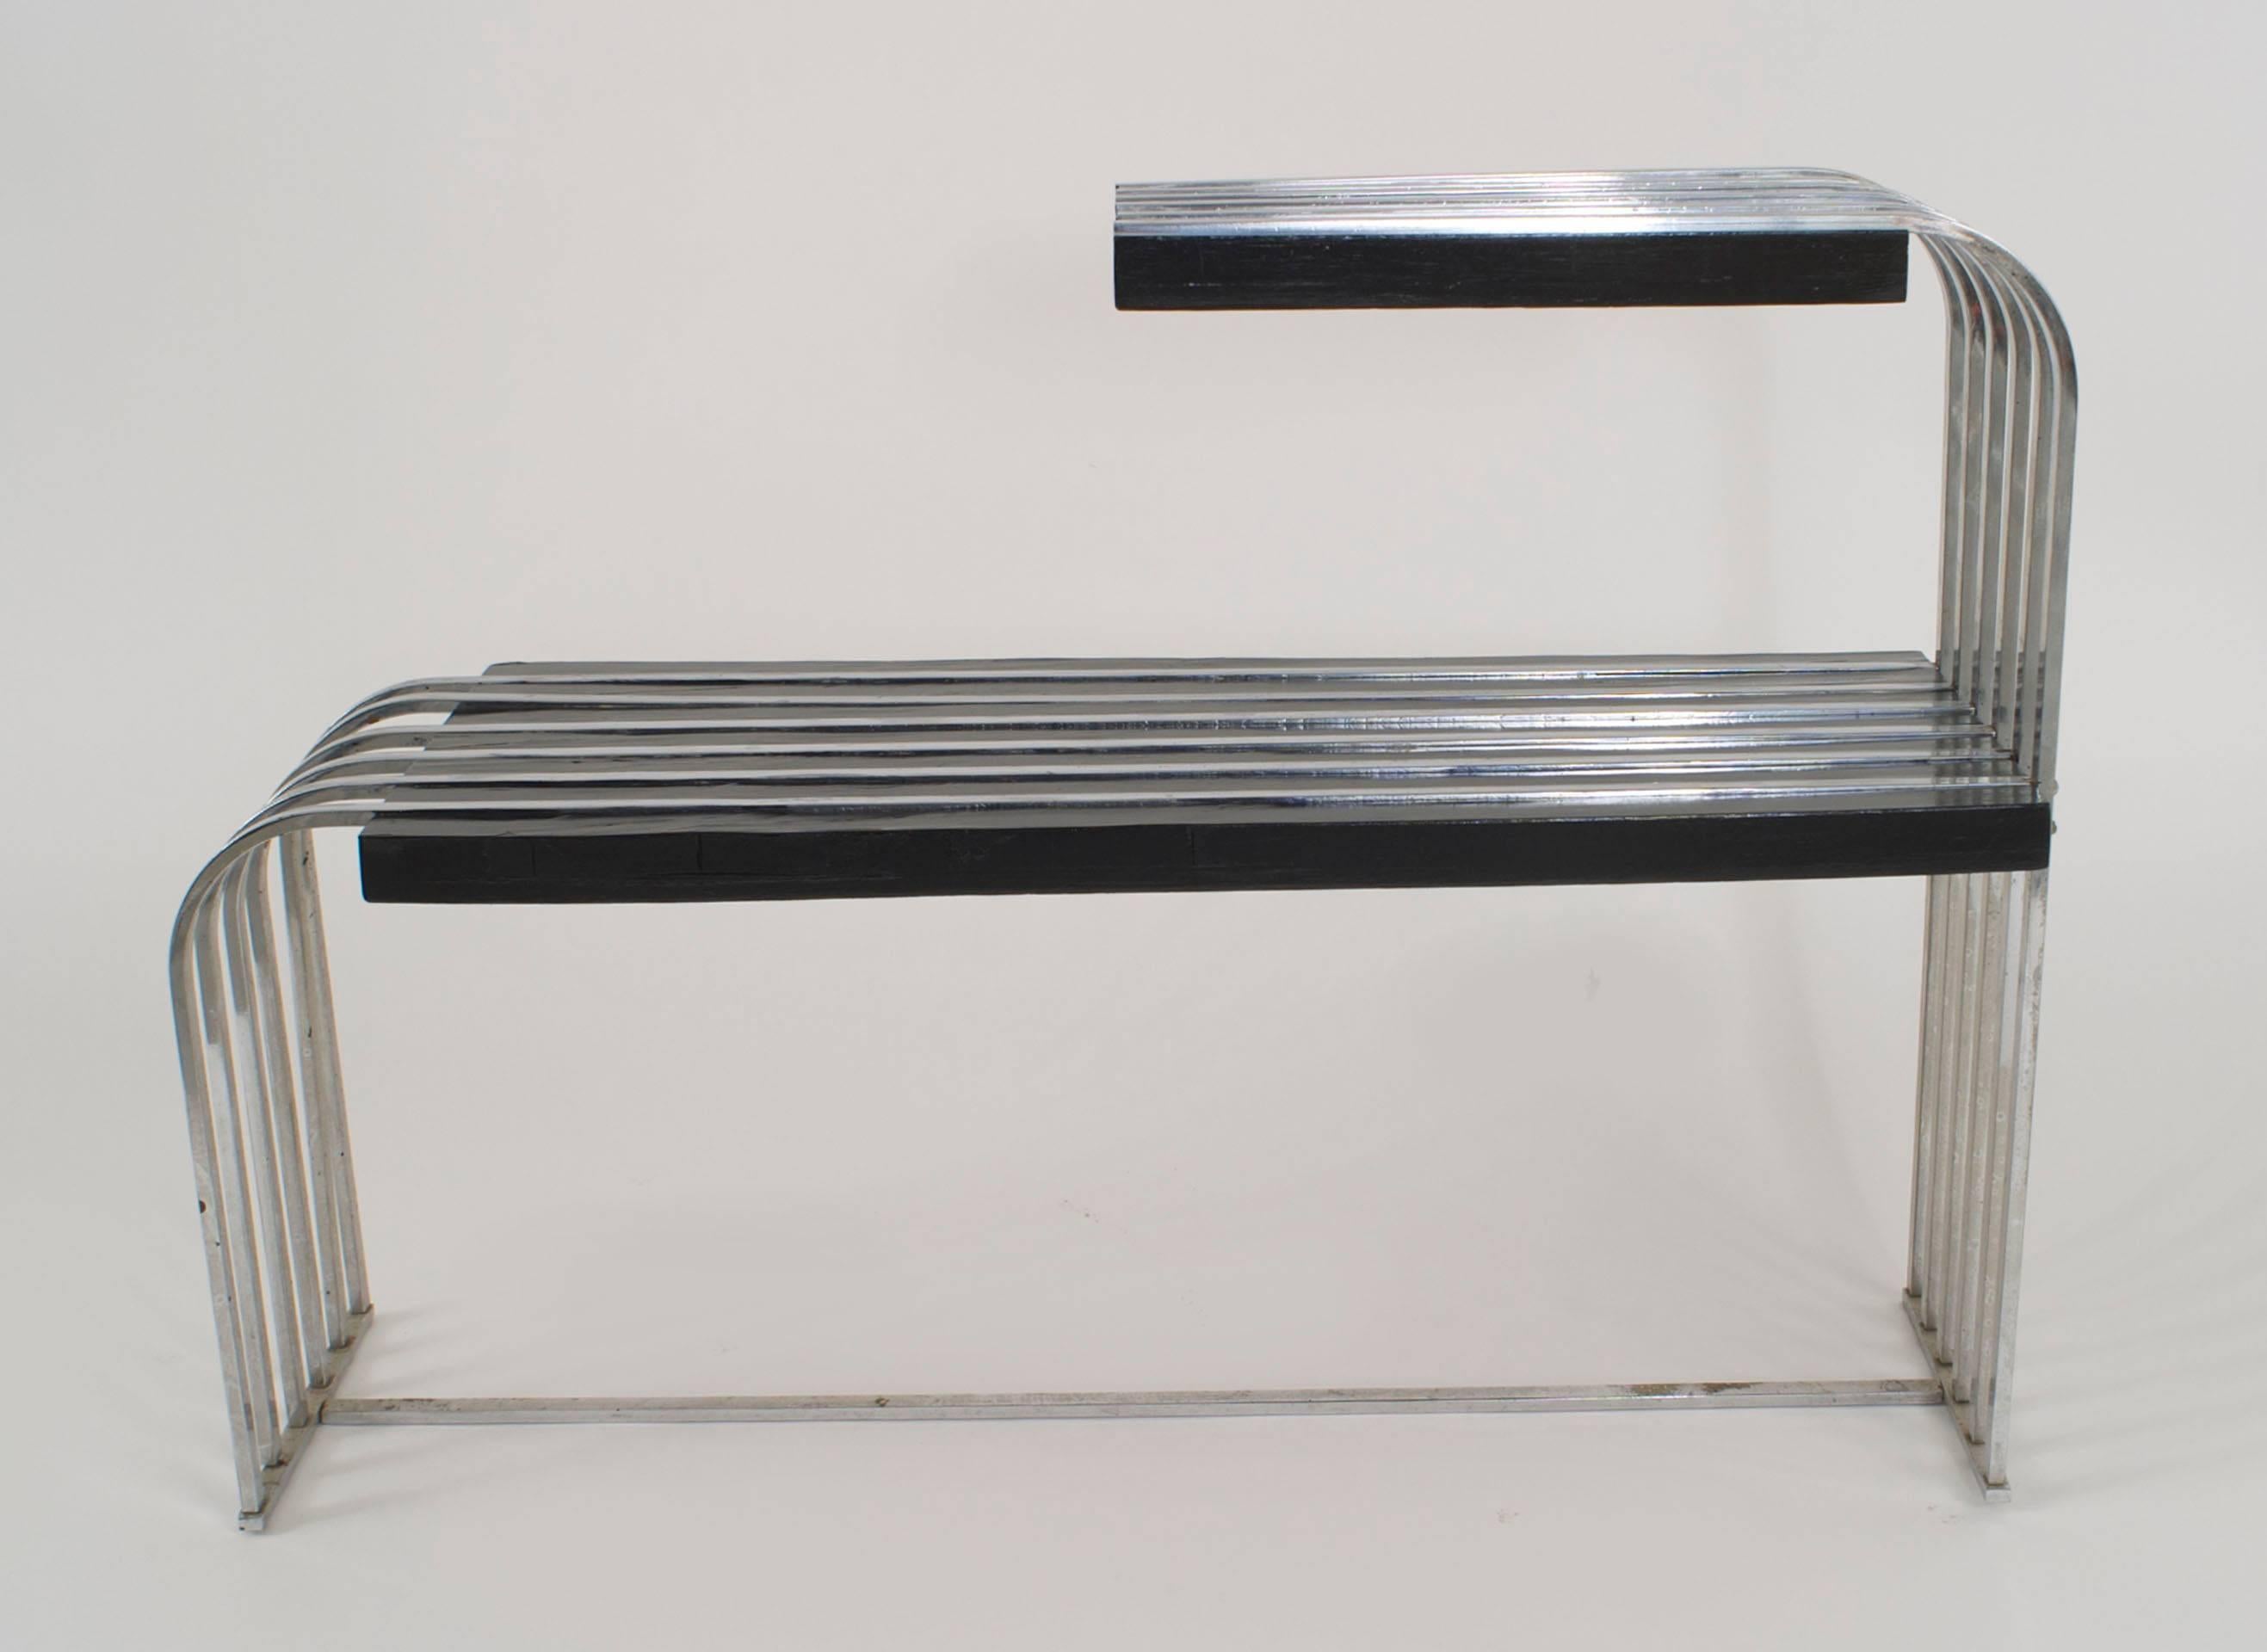 American Art Deco (1930s) black lacquered and chrome 2 tier end table with curved sides and a chrome stretcher.
